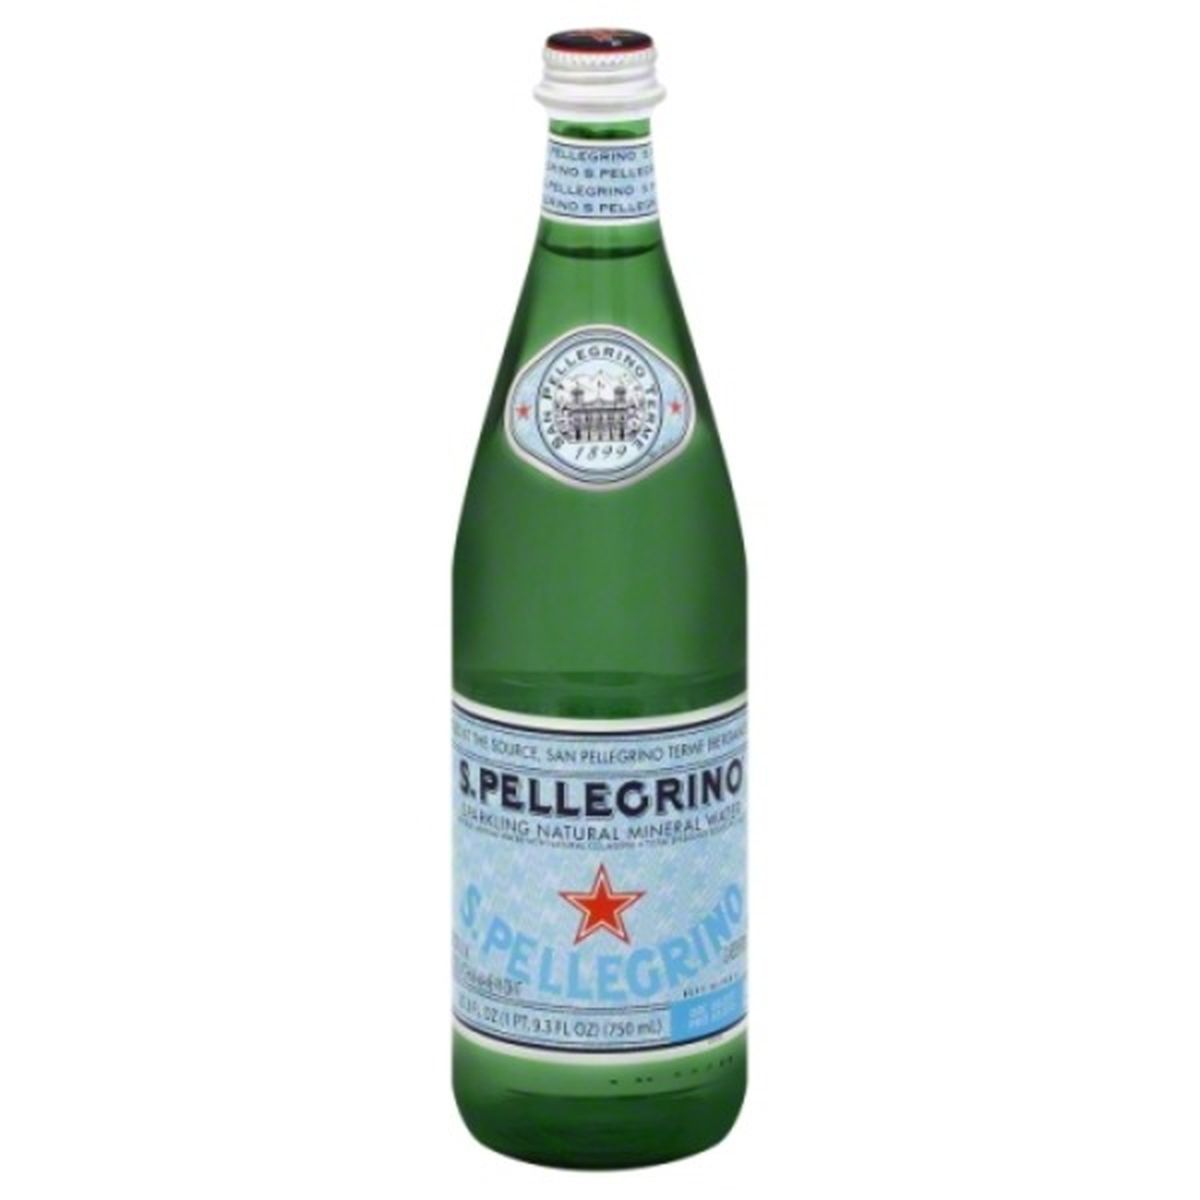 Calories in S.Pellegrino Sparkling Water, Natural Mineral